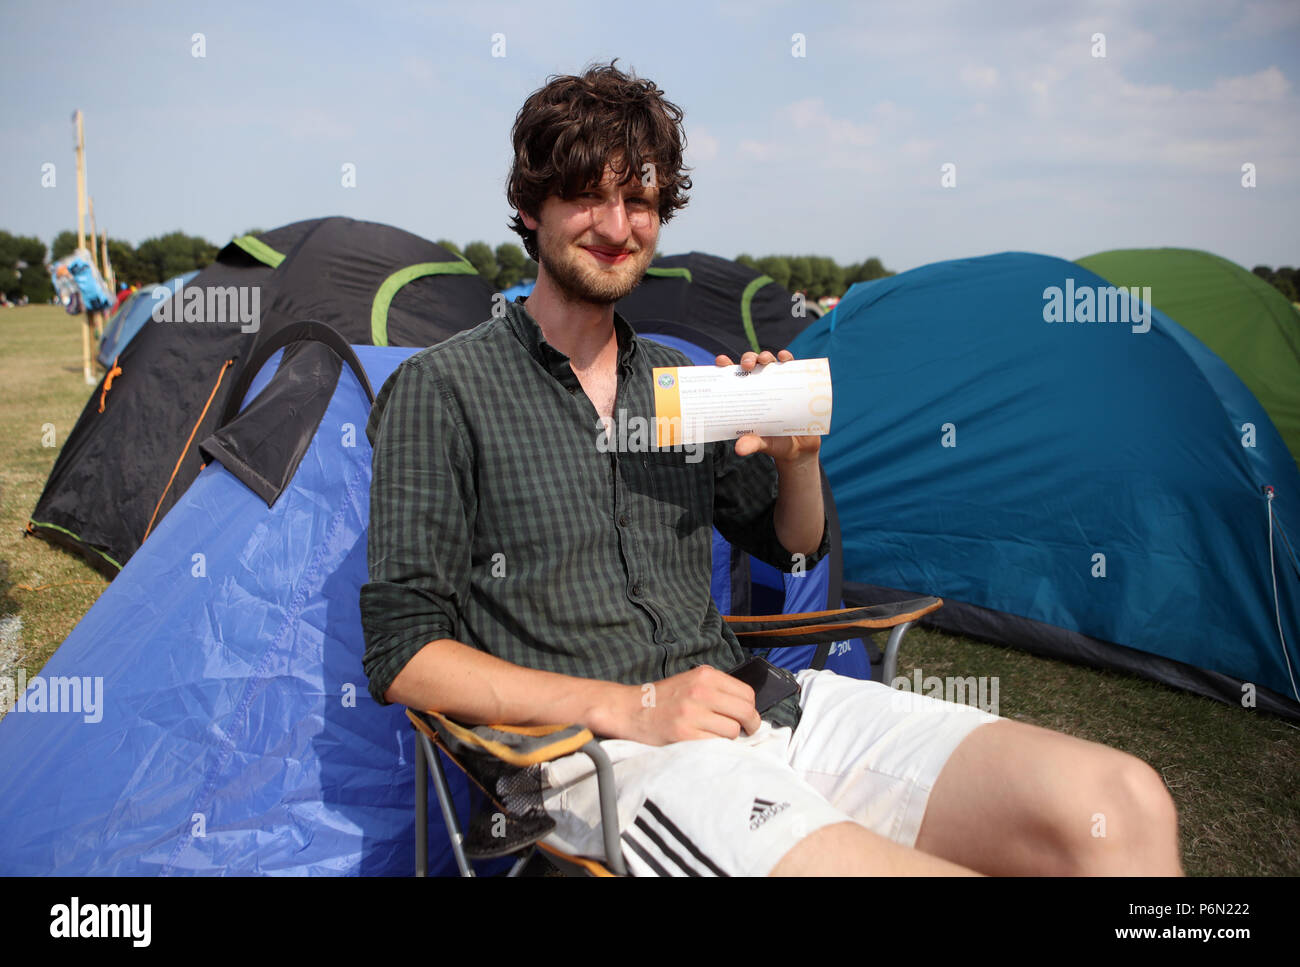 Darius Platt-Vowles from Gloucestershire is first in the queue ahead of the 2018 Wimbledon Championships at The All England Lawn Tennis and Croquet Club, Wimbledon.at the All England Lawn Tennis and Croquet Club, Wimbledon. Stock Photo